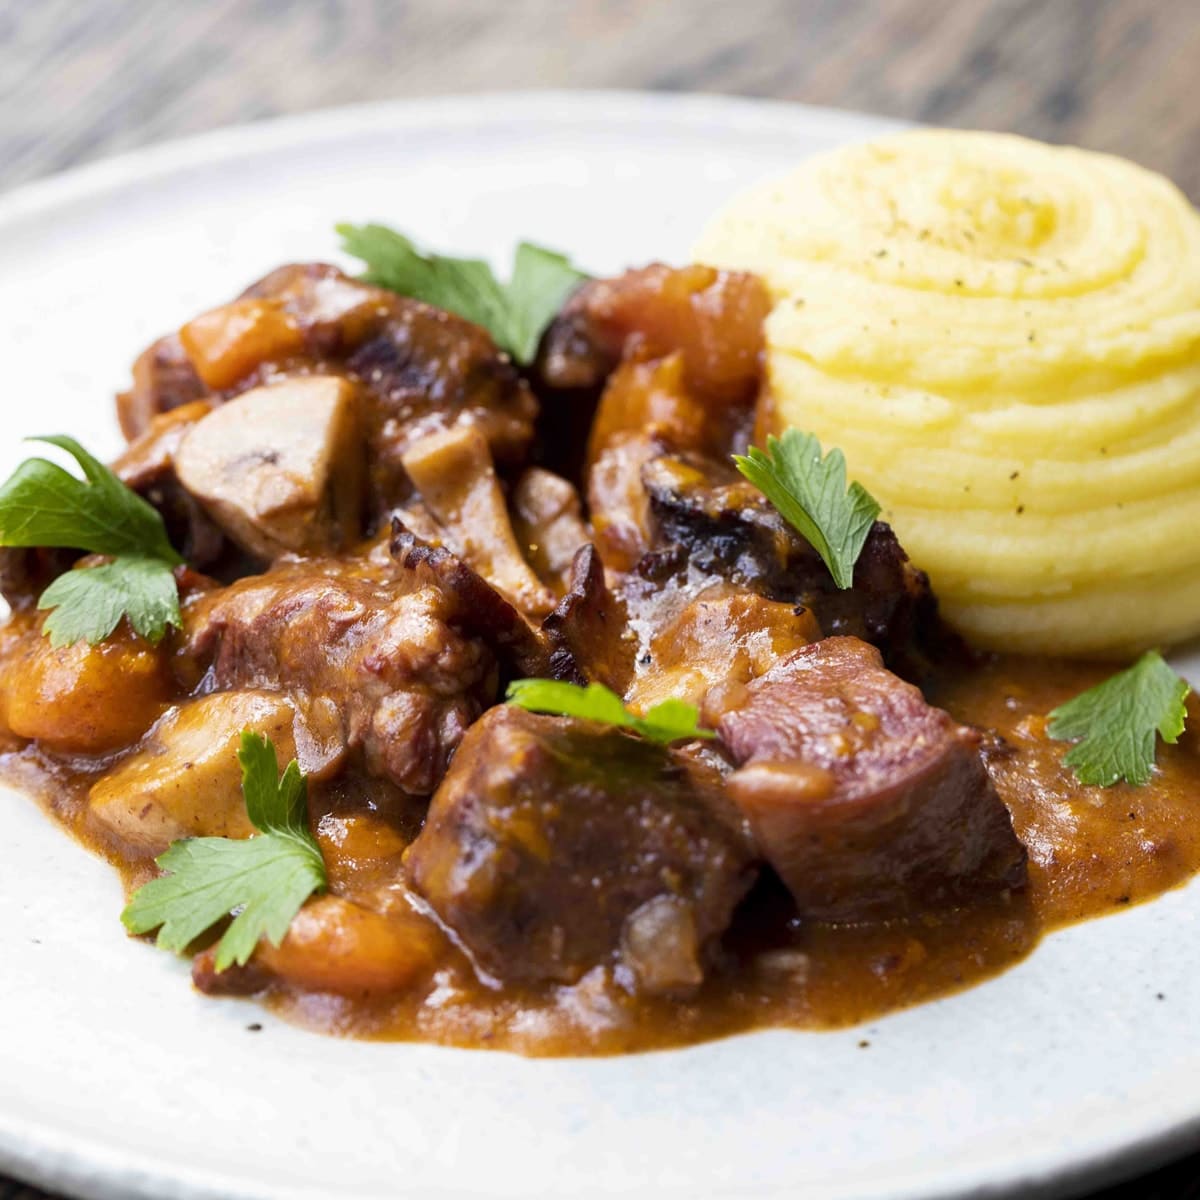 Beef Bourguignon for Two